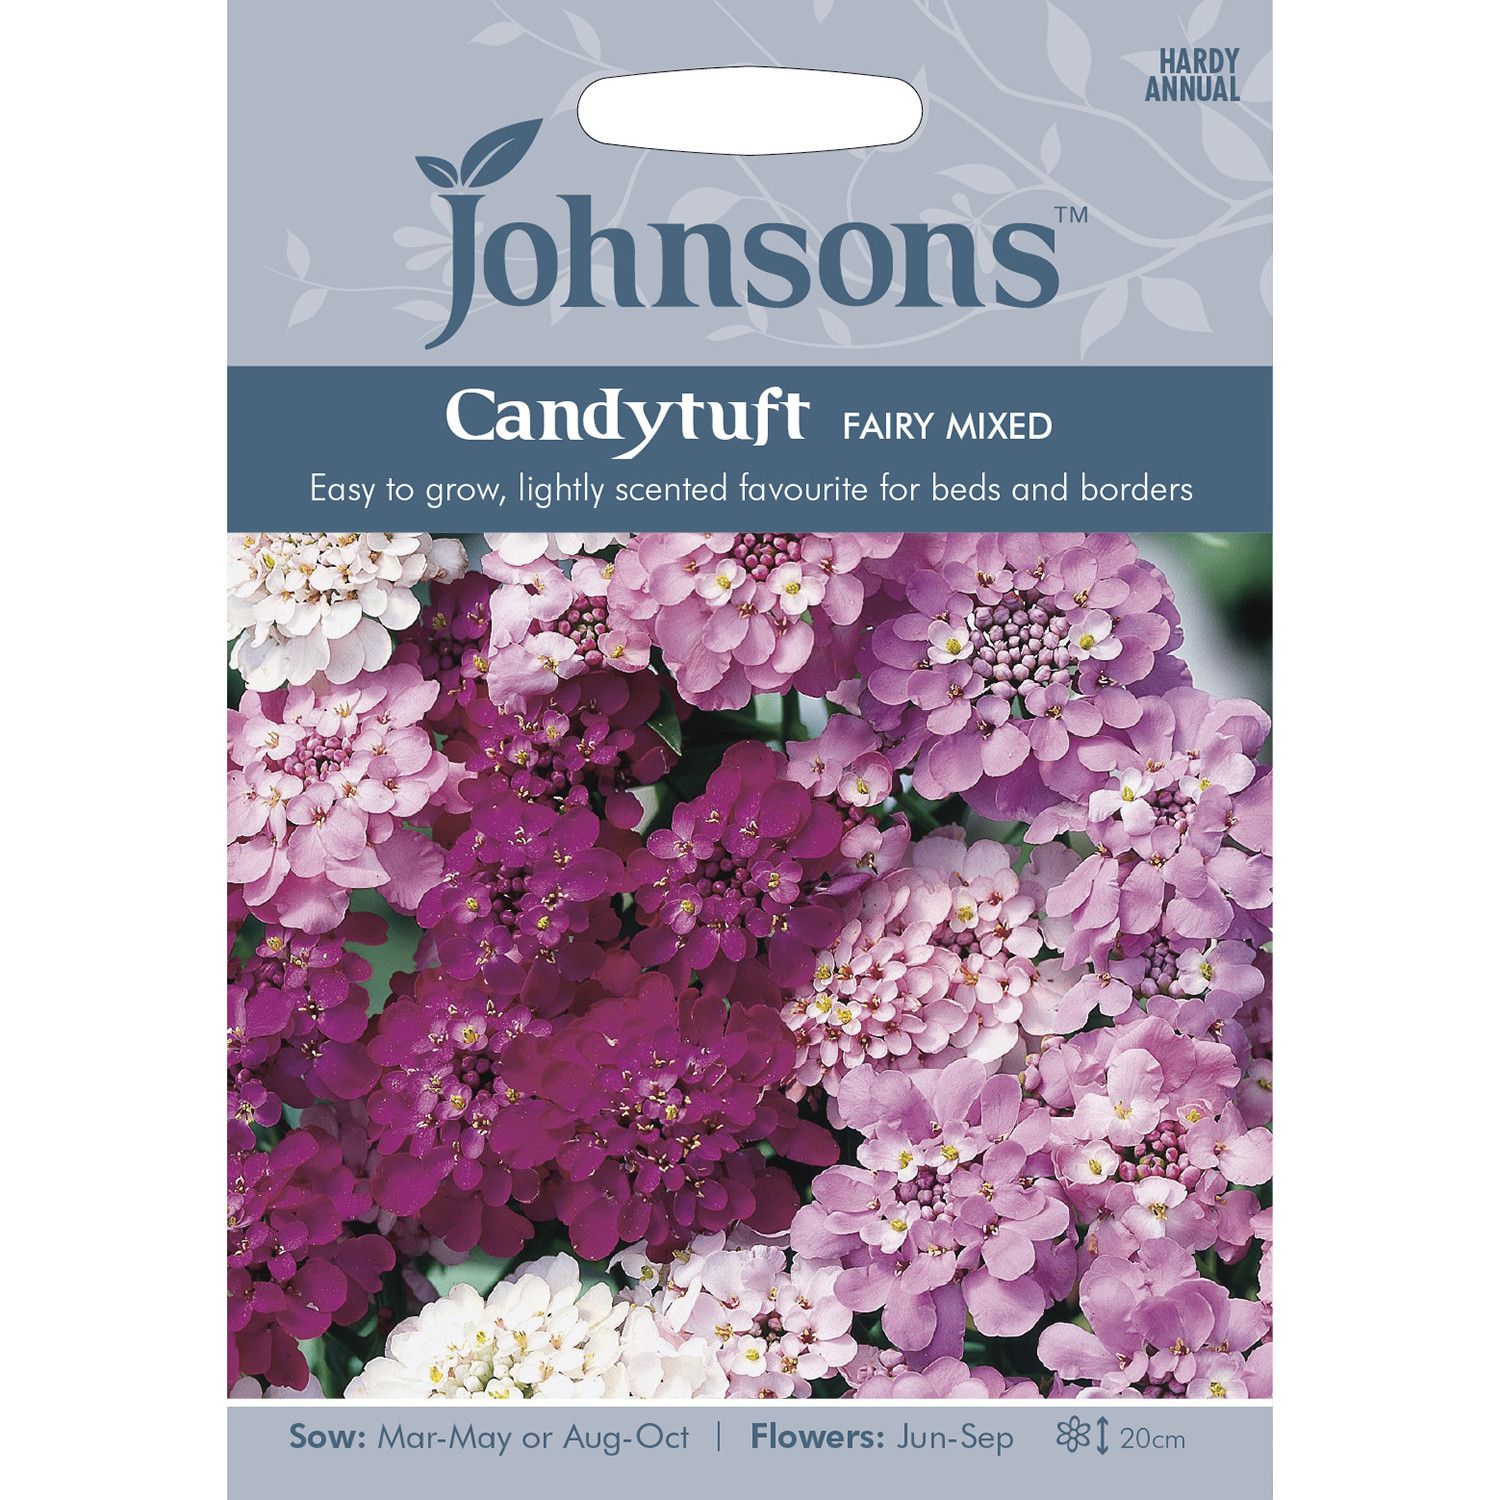 Johnsons Candytuft Fairy Mixed Flower Seeds Image 2